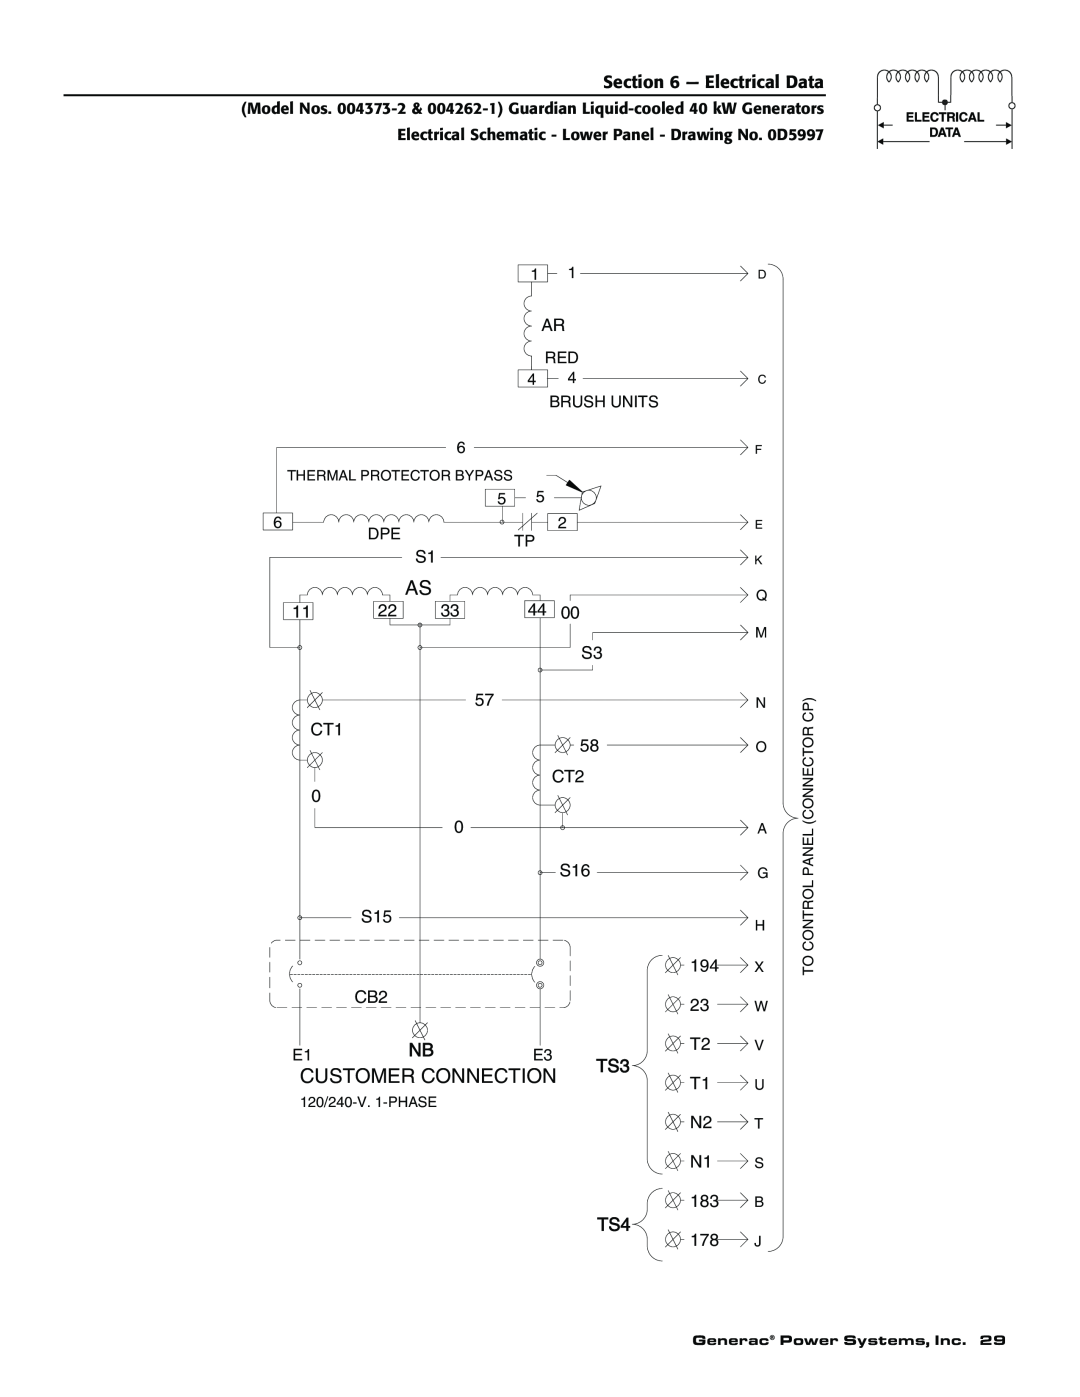 Generac 004626-1, 004373-2 Customer Connection, T2 T1 U N2 T N1 S, Electrical Schematic - Lower Panel - Drawing No. 0D5997 